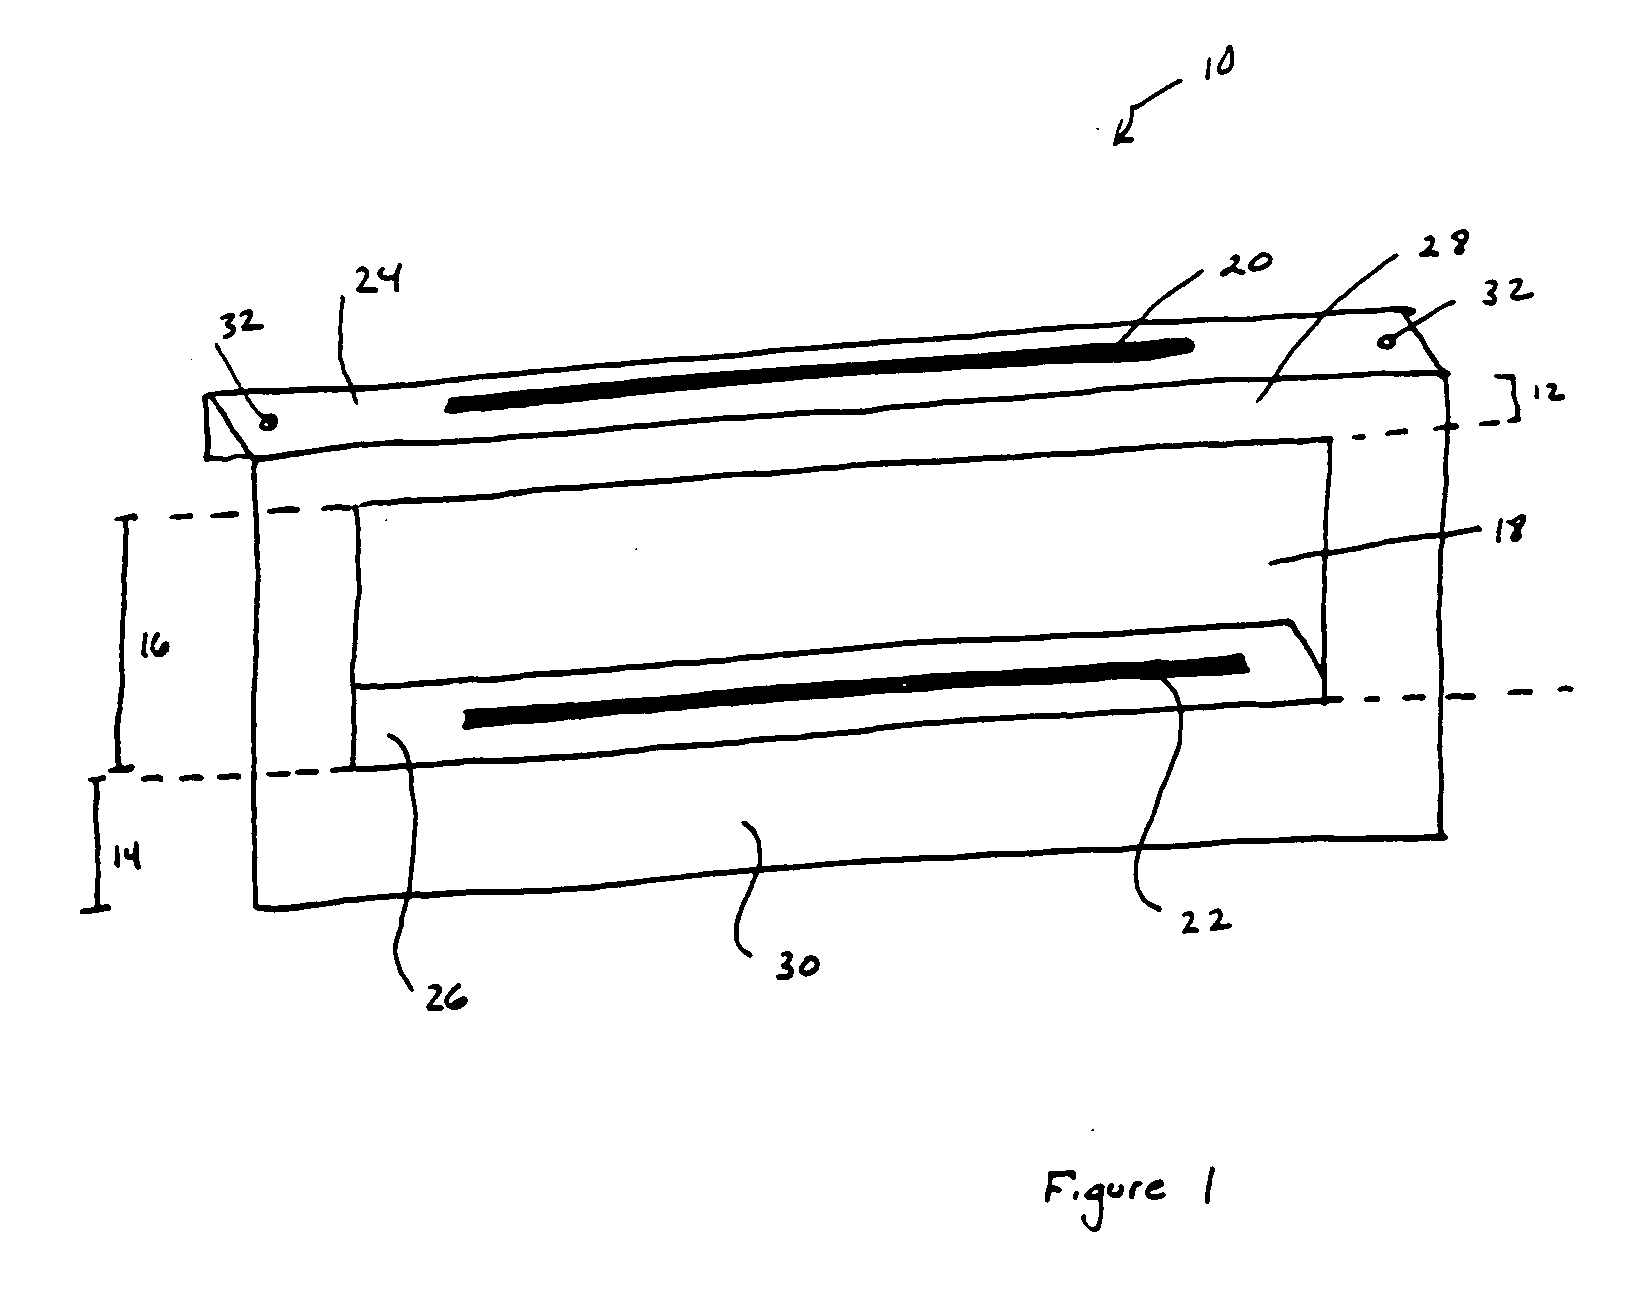 Suspension holding device and method of use